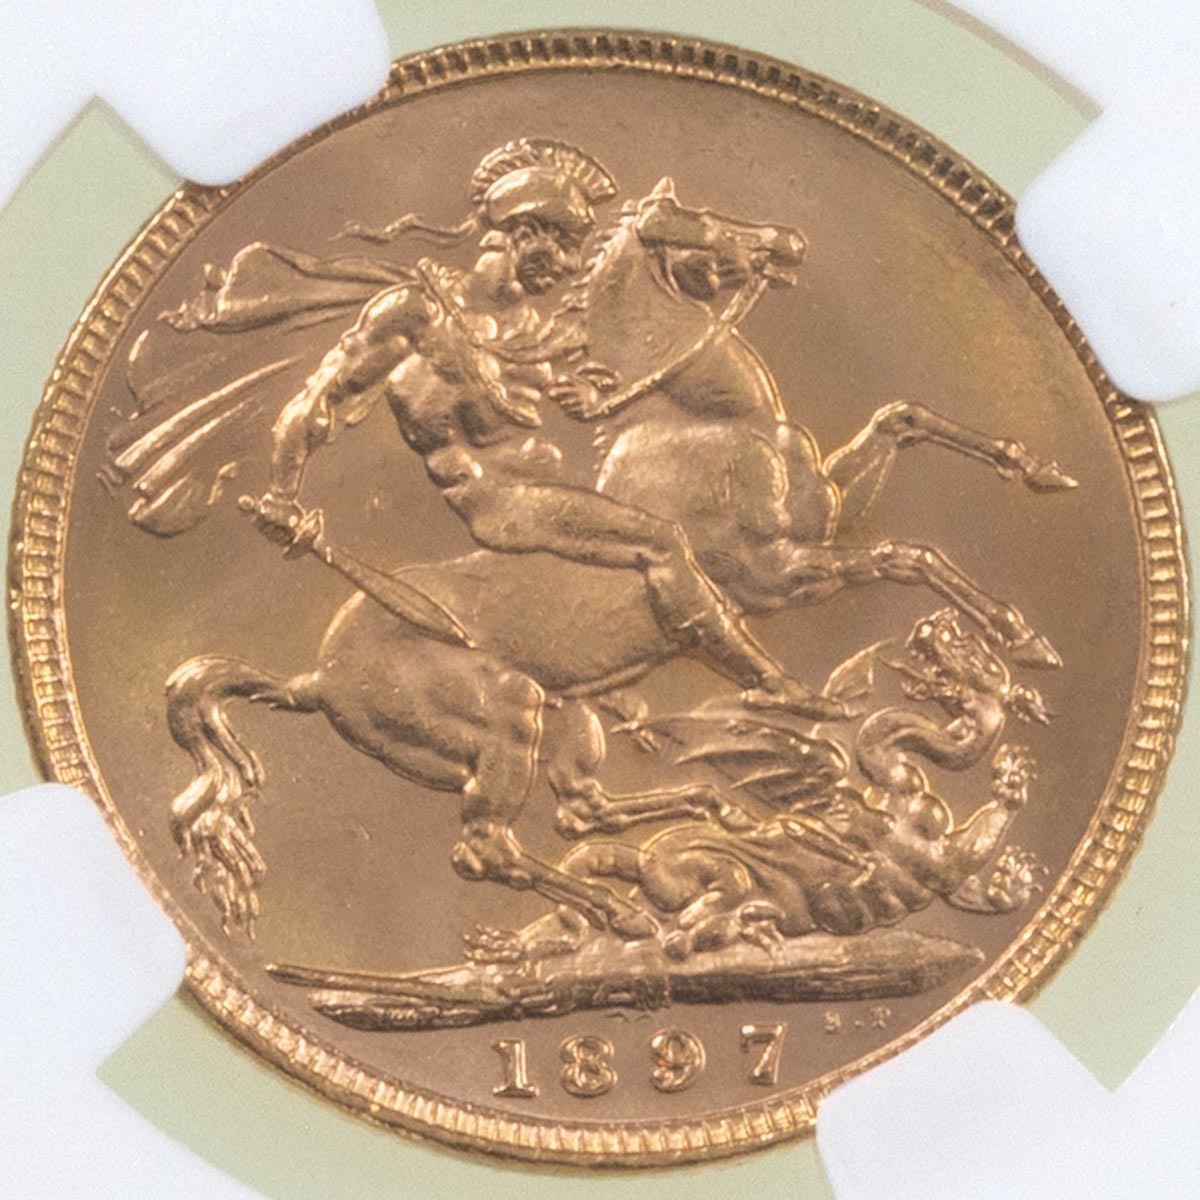 1897 Queen Victoria Gold Full Sovereign Melbourne Australia Mint Widowed Head NGC Graded MS 64 Reverse